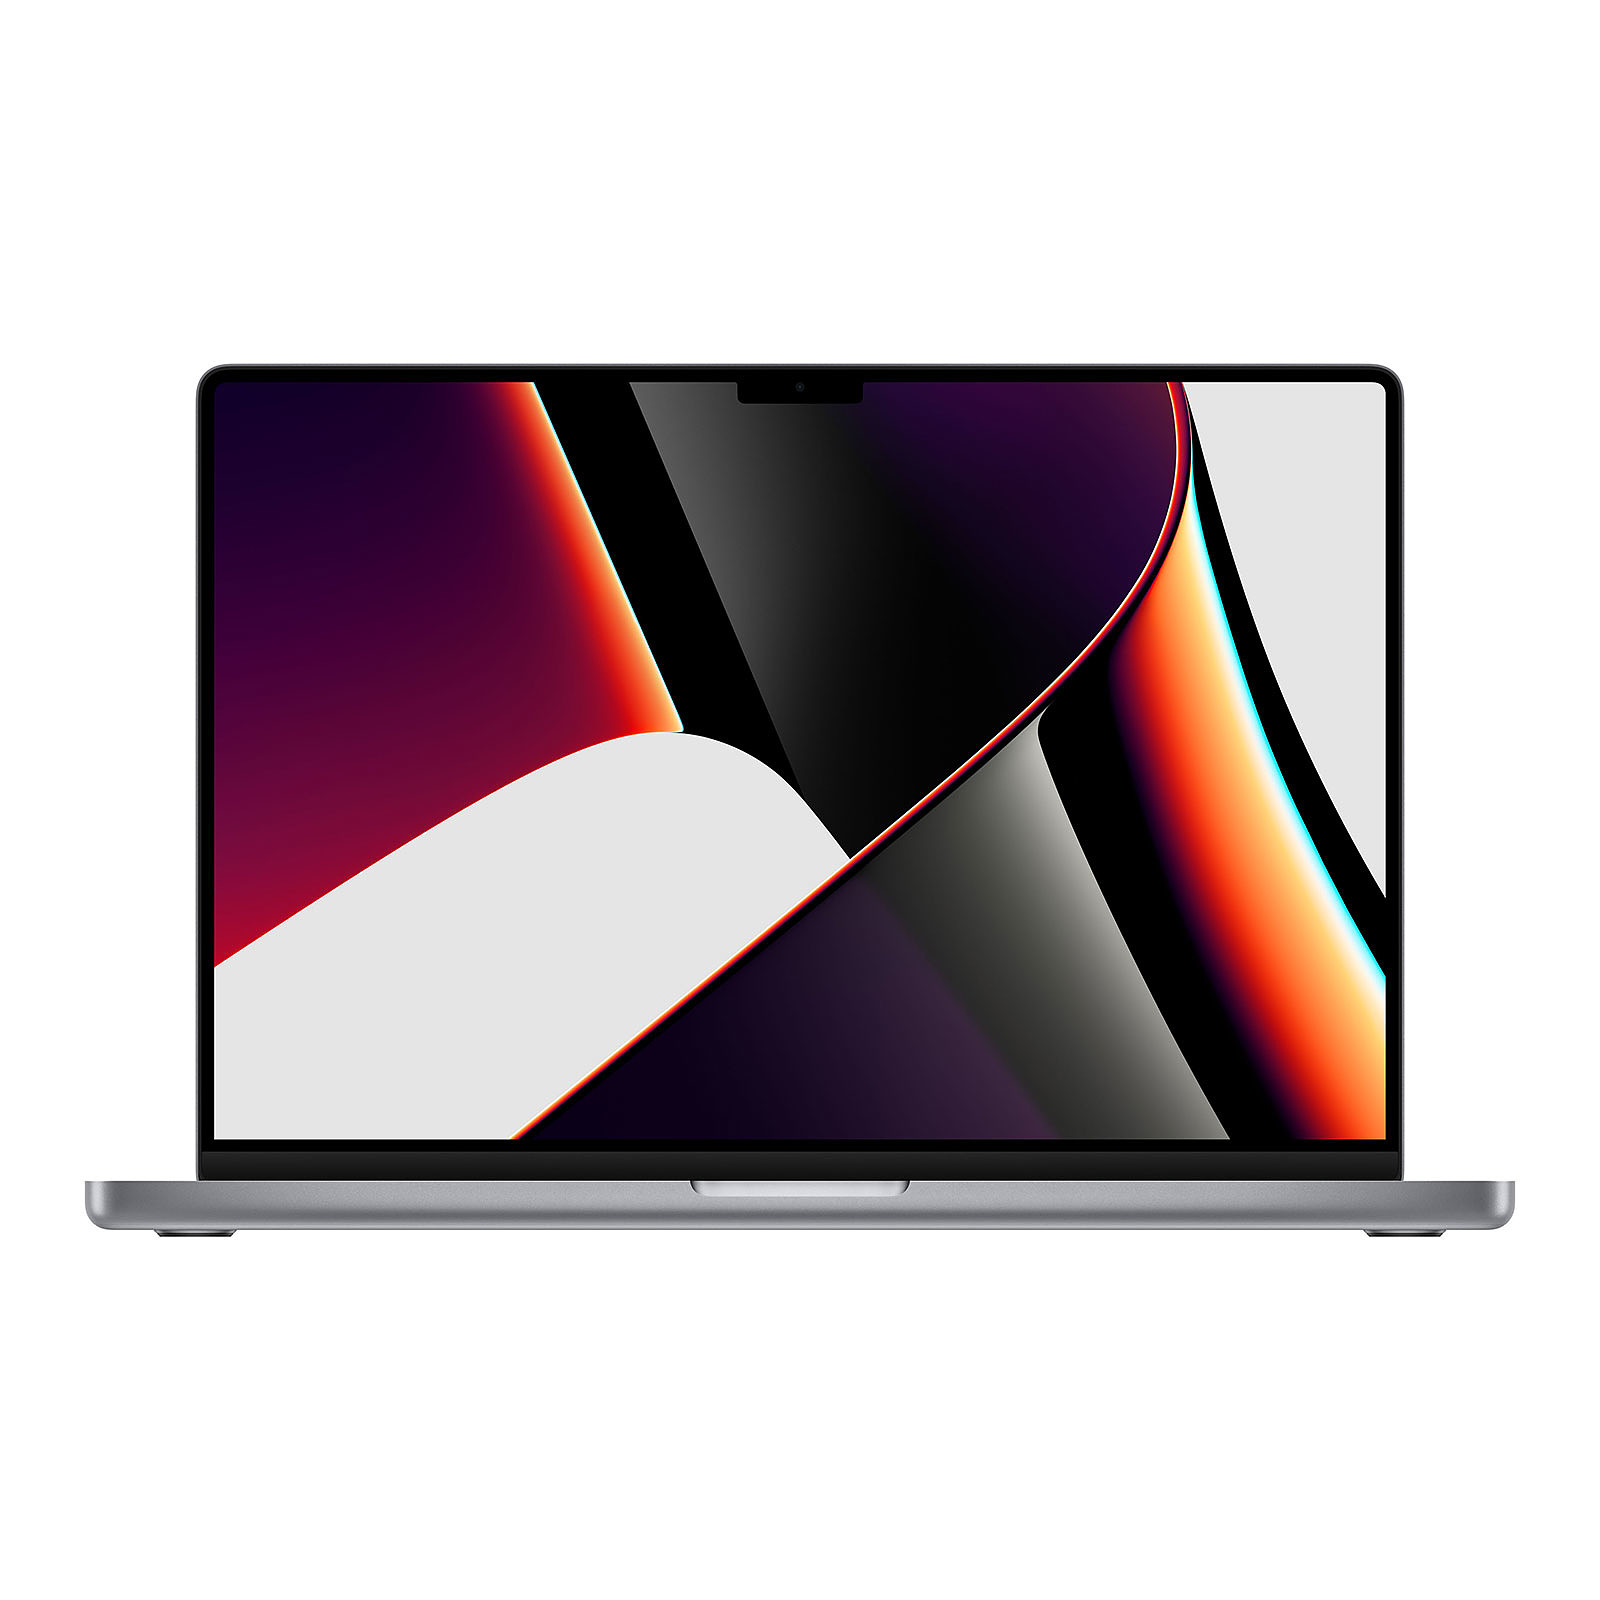 Apple MacBook Pro M1 Pro (2021) 16" Gris sideral 32Go/1To (MK193FN/A-32GB) - MacBook Apple